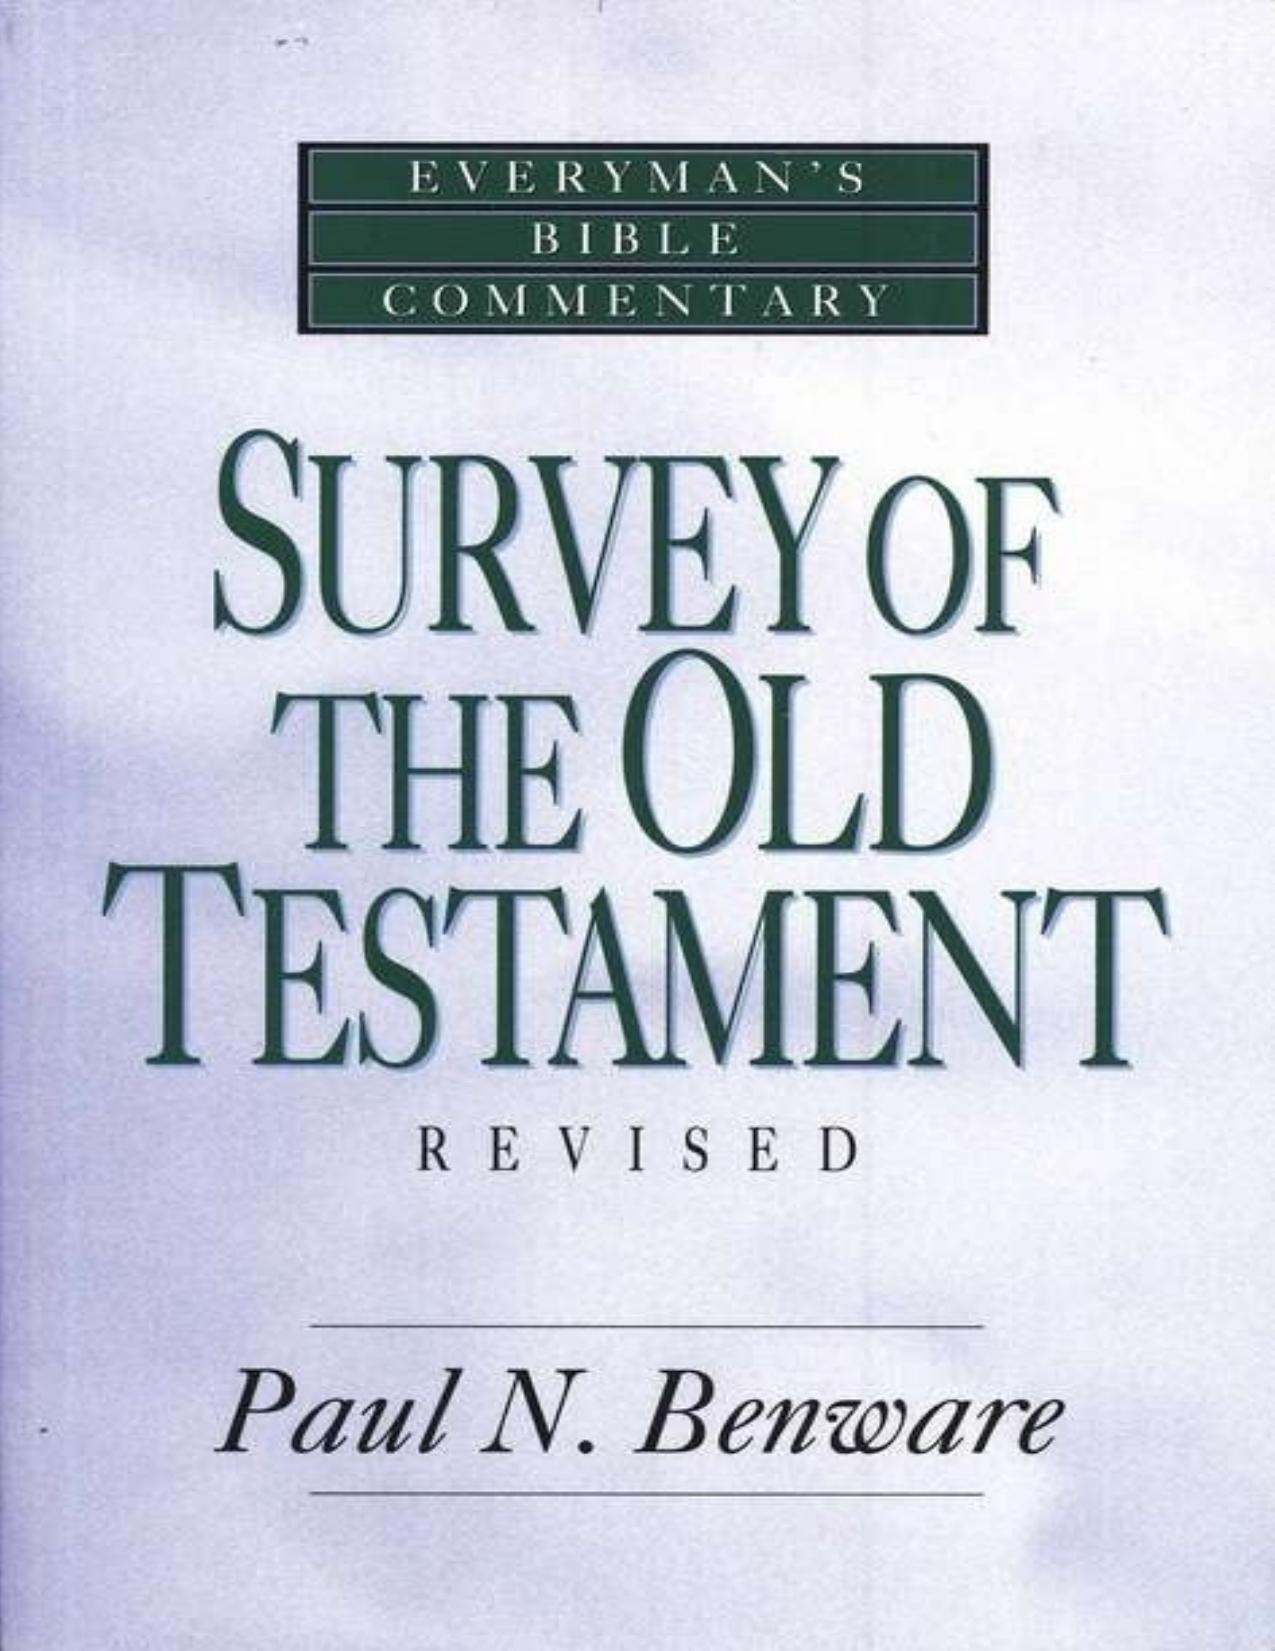 Survey of the Old Testament \(Everyman\'s Bible Commentary\) - PDFDrive.com